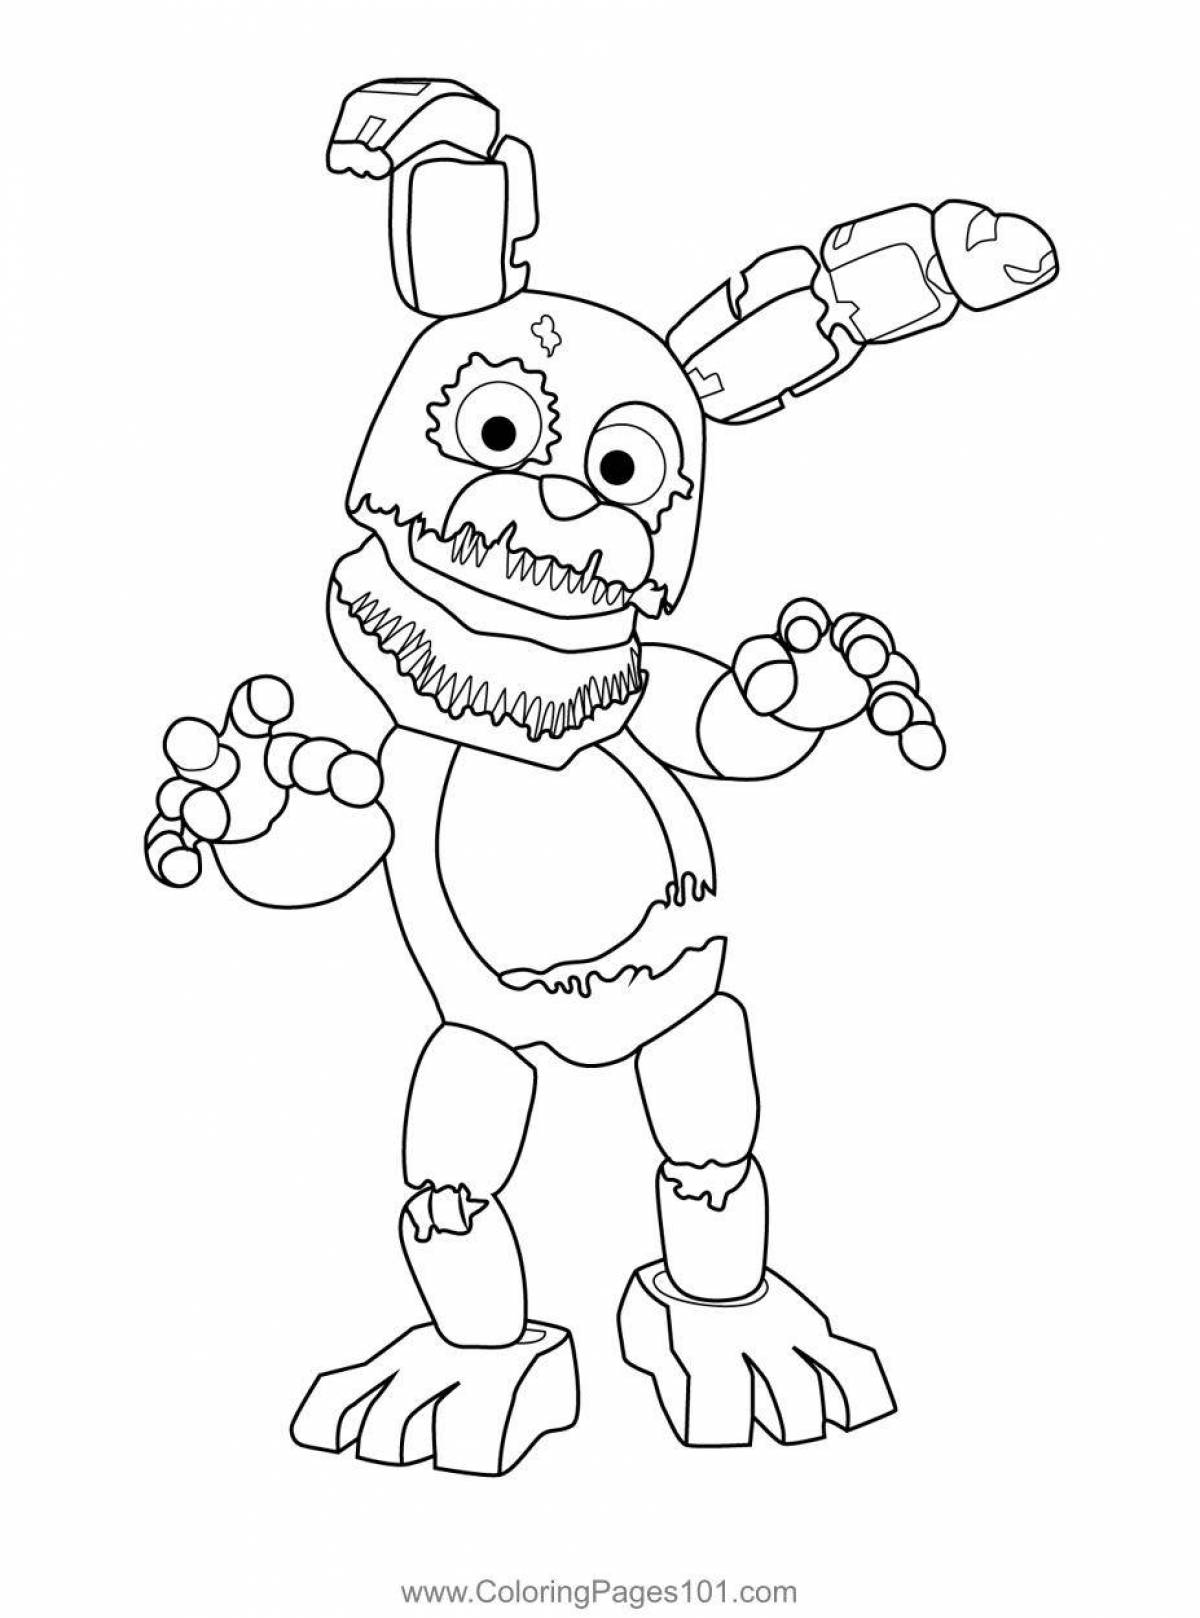 The incredible bonnie fnaf 1 coloring